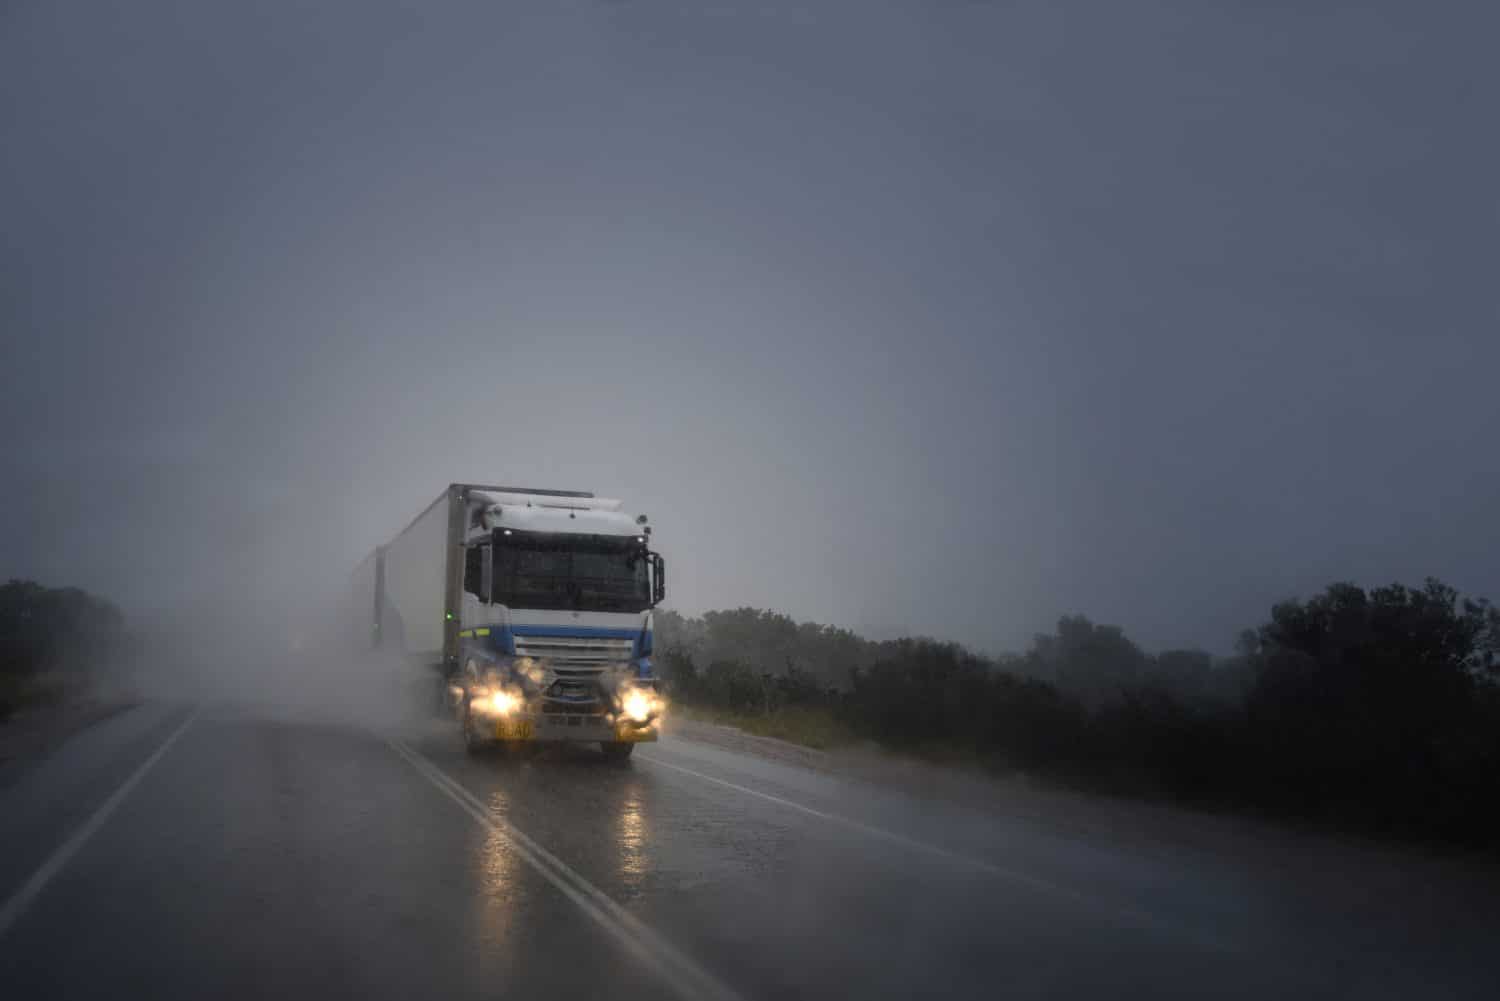 A commercial vehicle drives in the rain, increasing the risk of an Arkansas truck accident caused by bad weather.